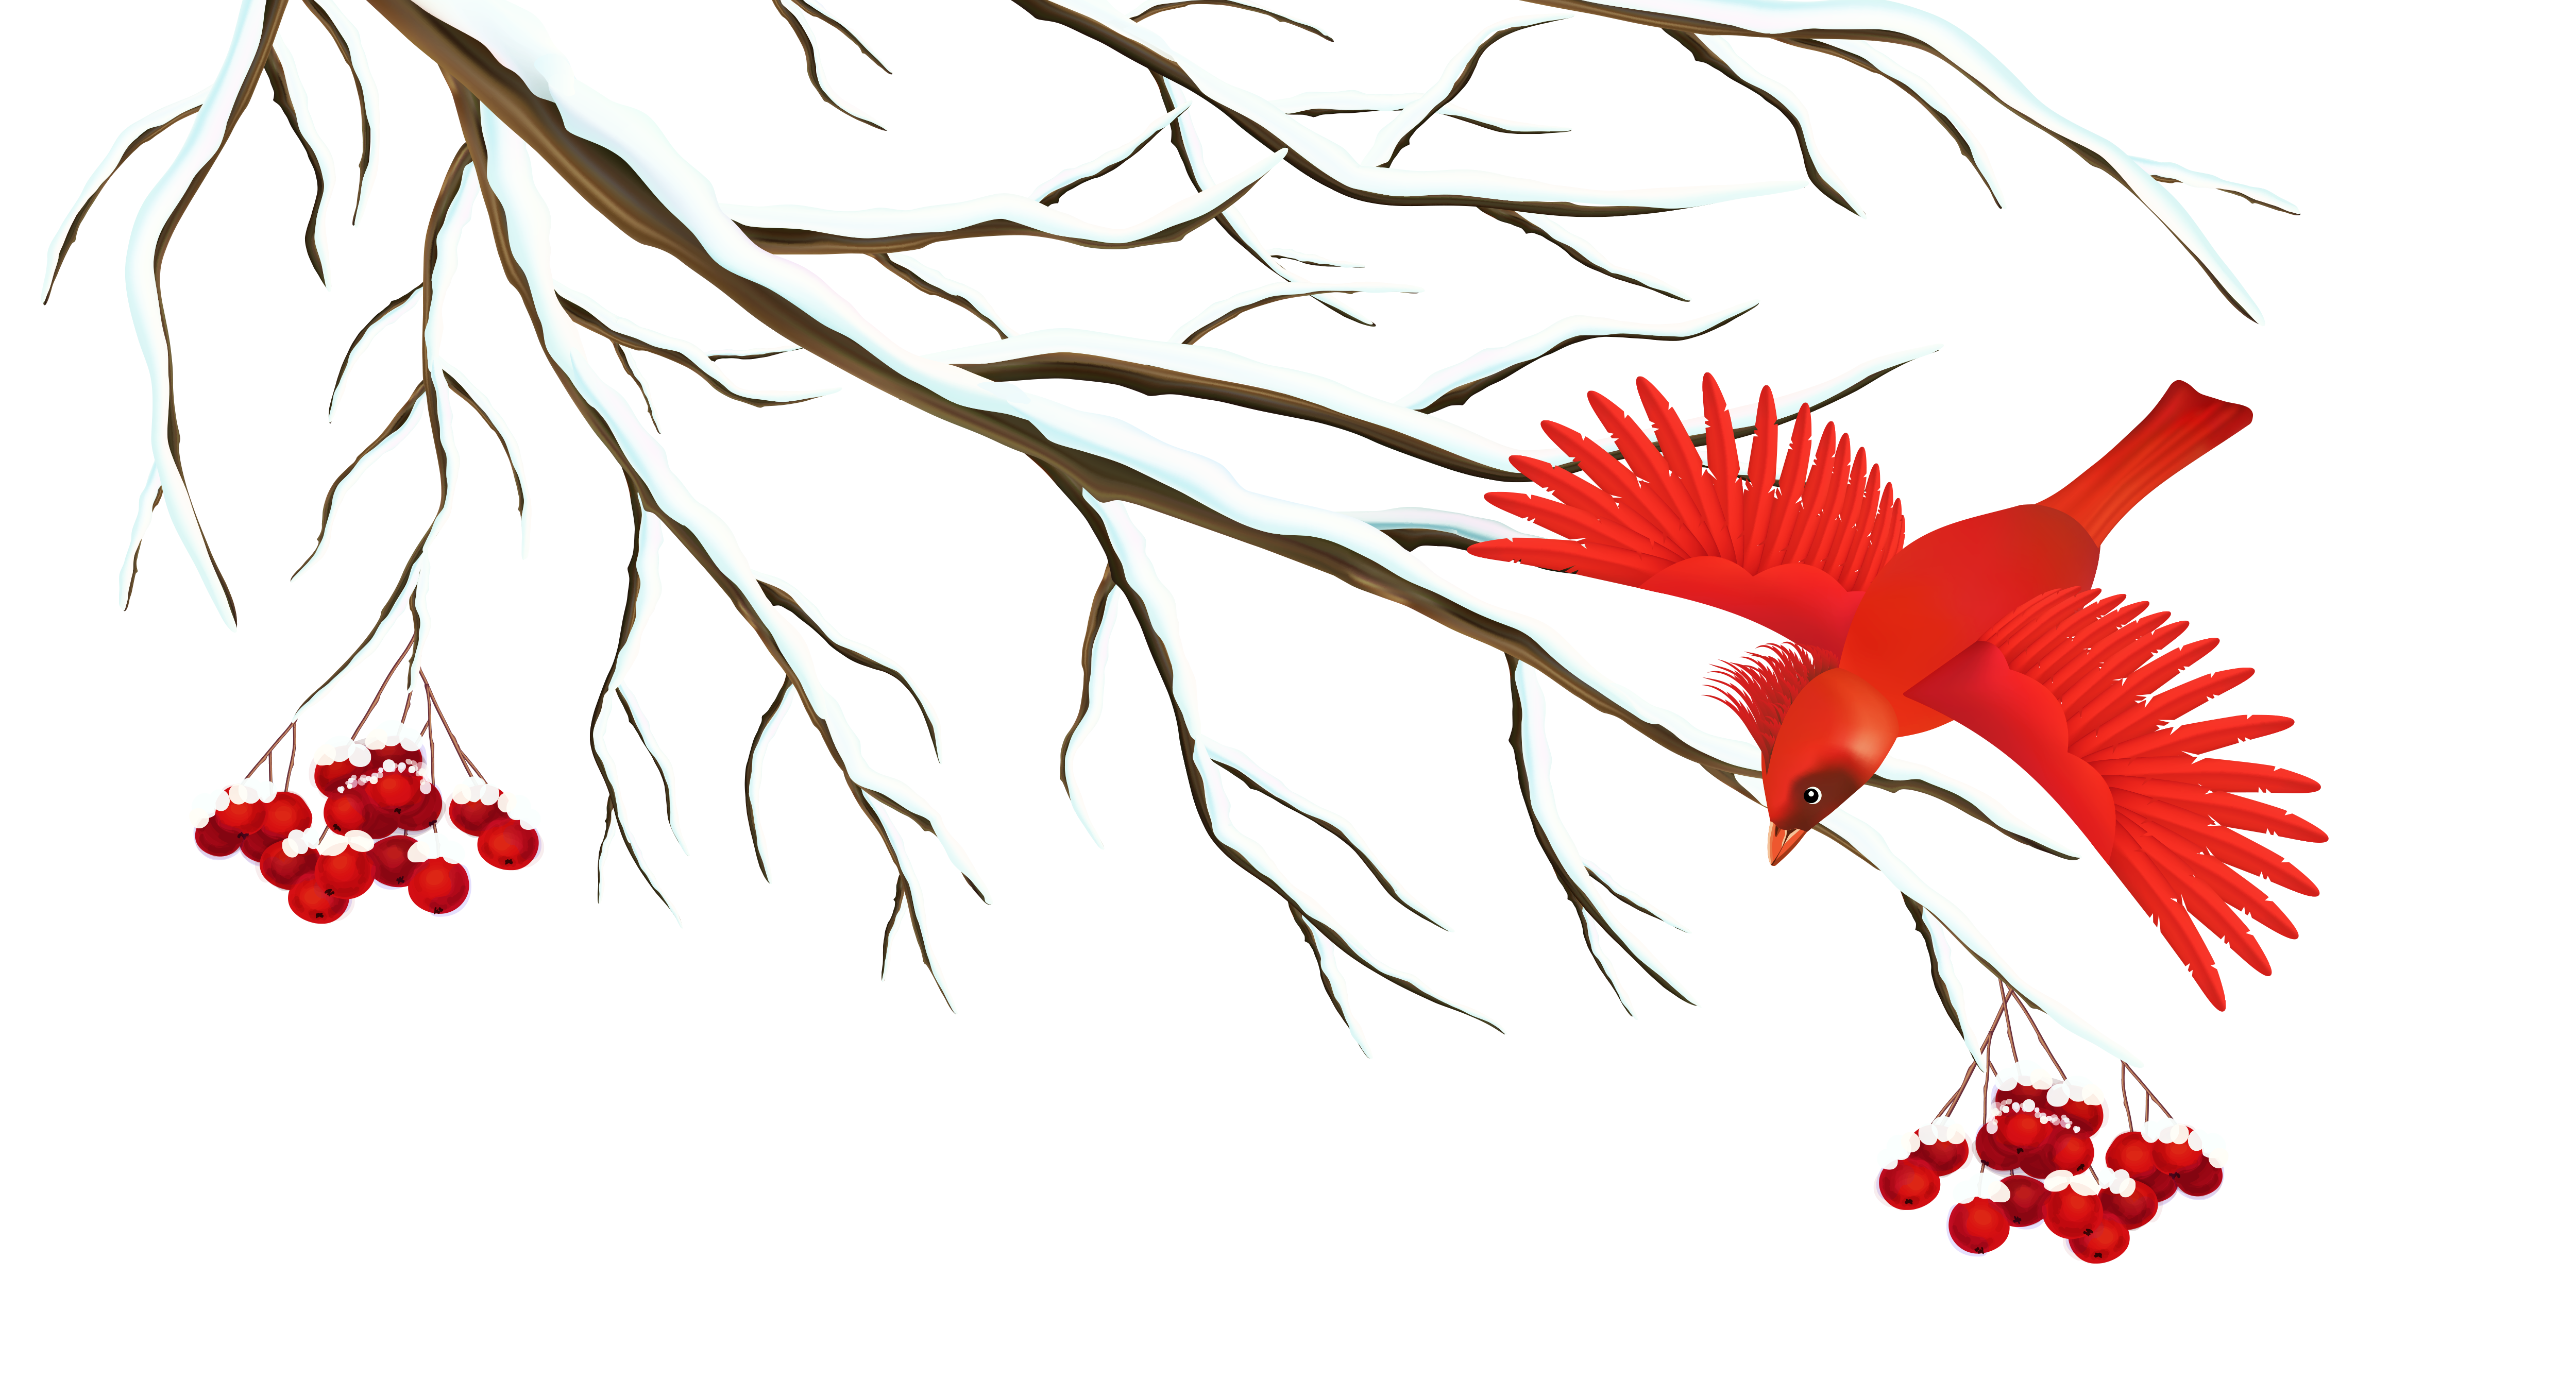 Winter Snowy Branch with Bird PNG Clipart Image 